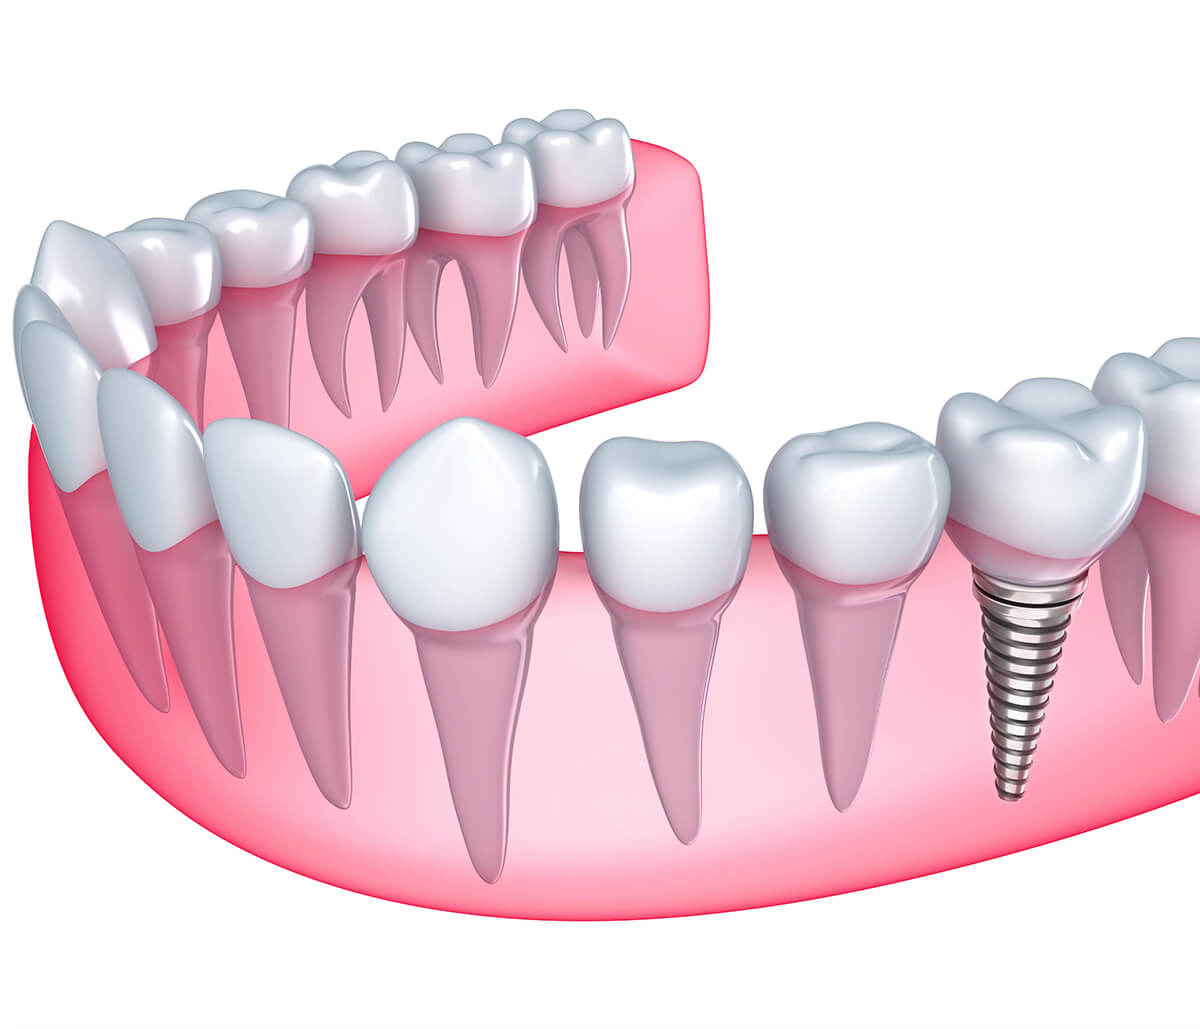 1, 2, 3 steps to replace a tooth, a mouthful of teeth with the dental implant procedure in Fort Worth, TX